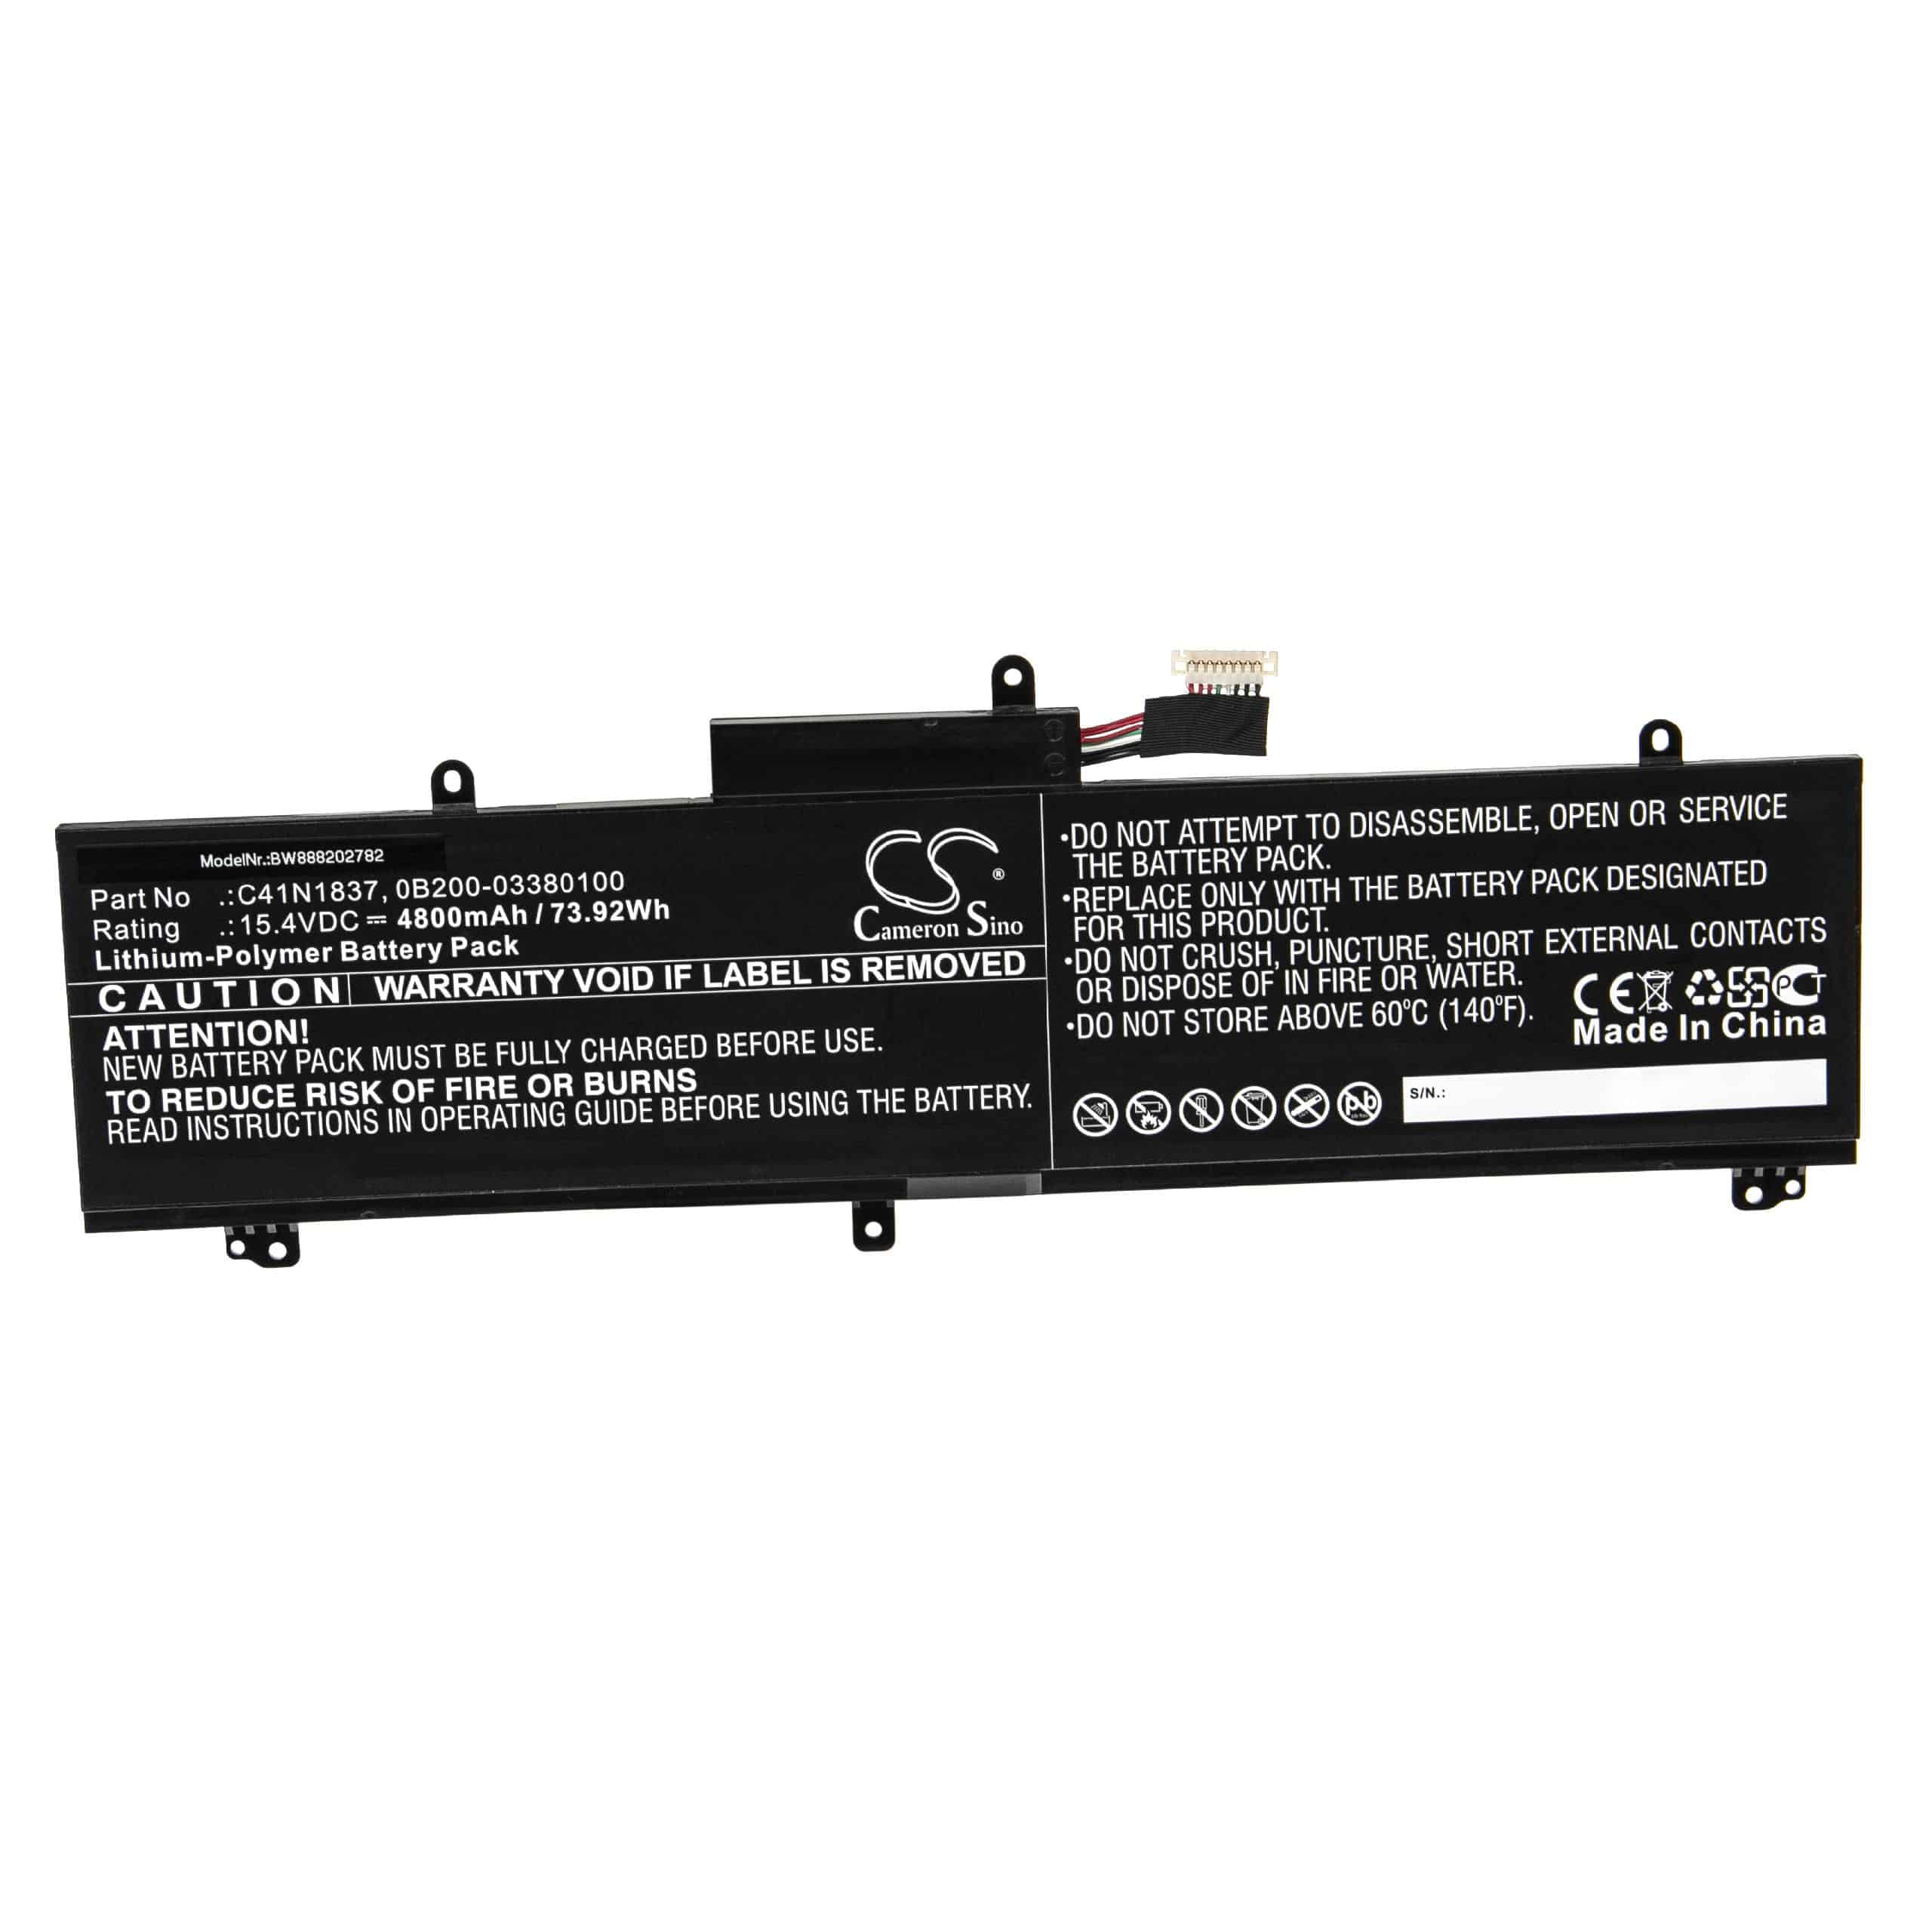 Notebook Battery Replacement for Asus C41N1837, 0B200-03380100 - 4800mAh 15.4V Li-polymer